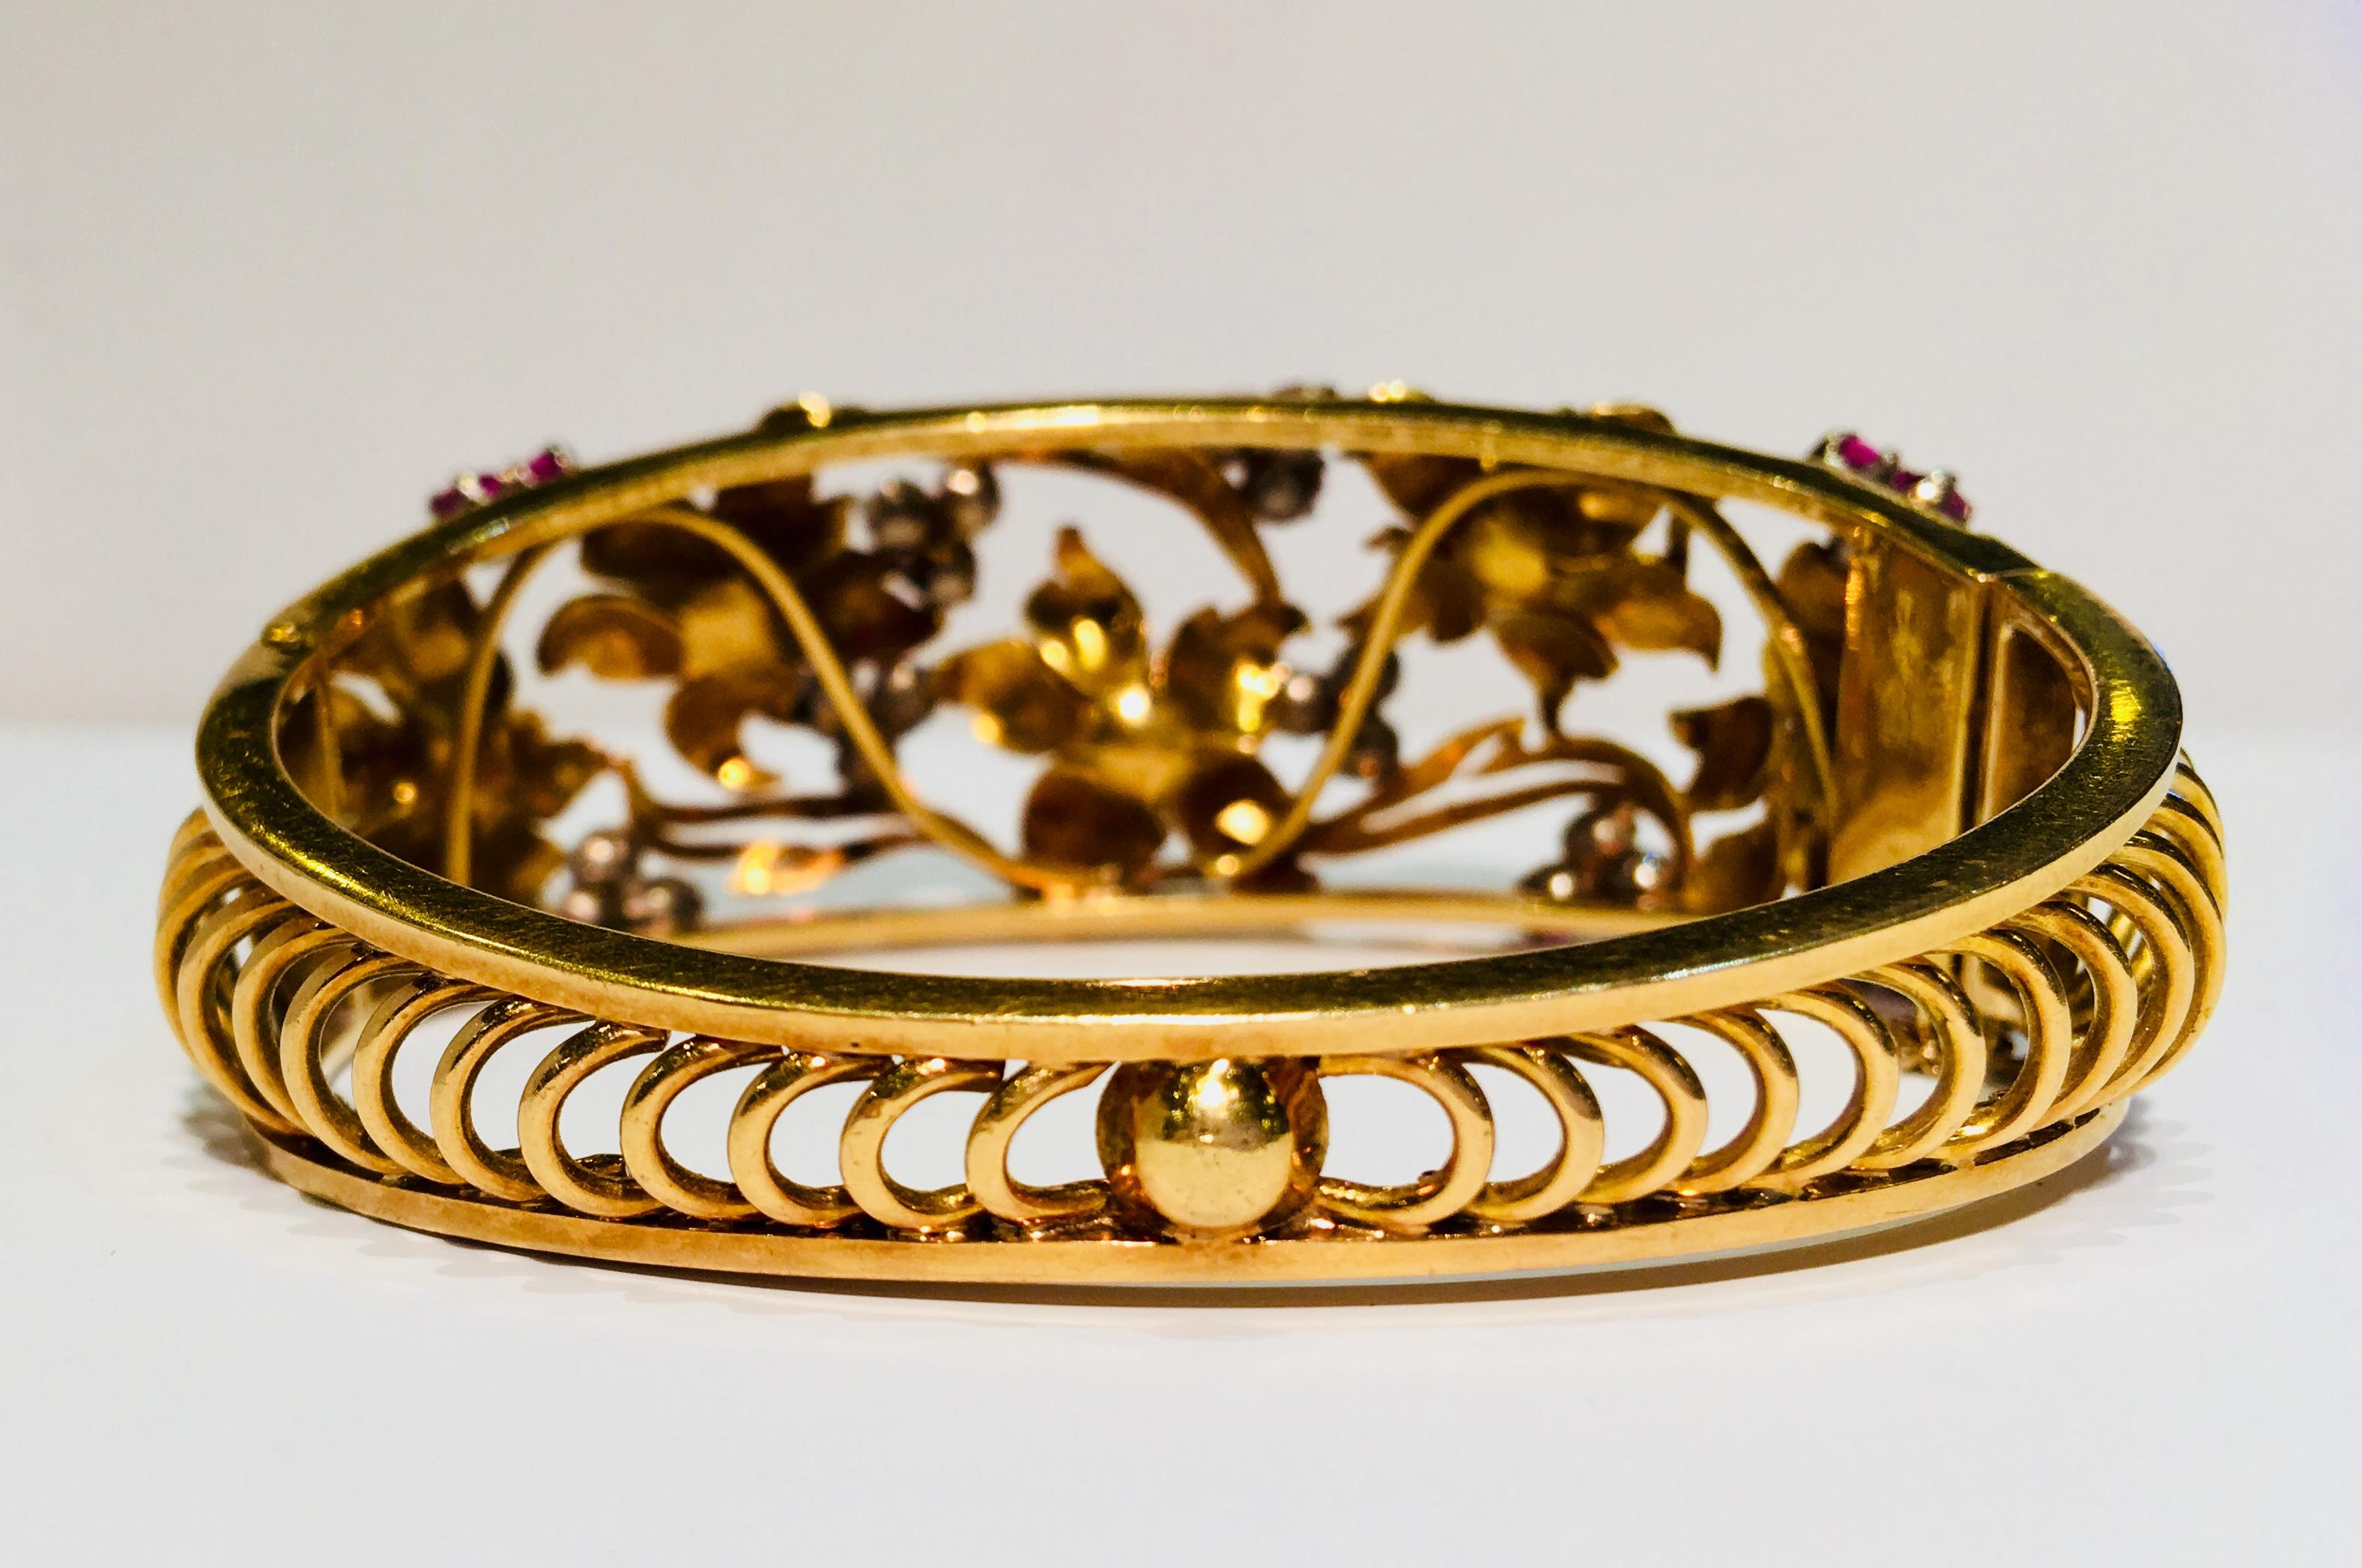 Gorgeous, handmade, 18 karat yellow gold floral estate bracelet from the early 1900s has the graceful flowing lines of stylized, intertwined flowers and leaves popularized by the Art Nouveau movement.

Tapered, hinged bangle bracelet features 5